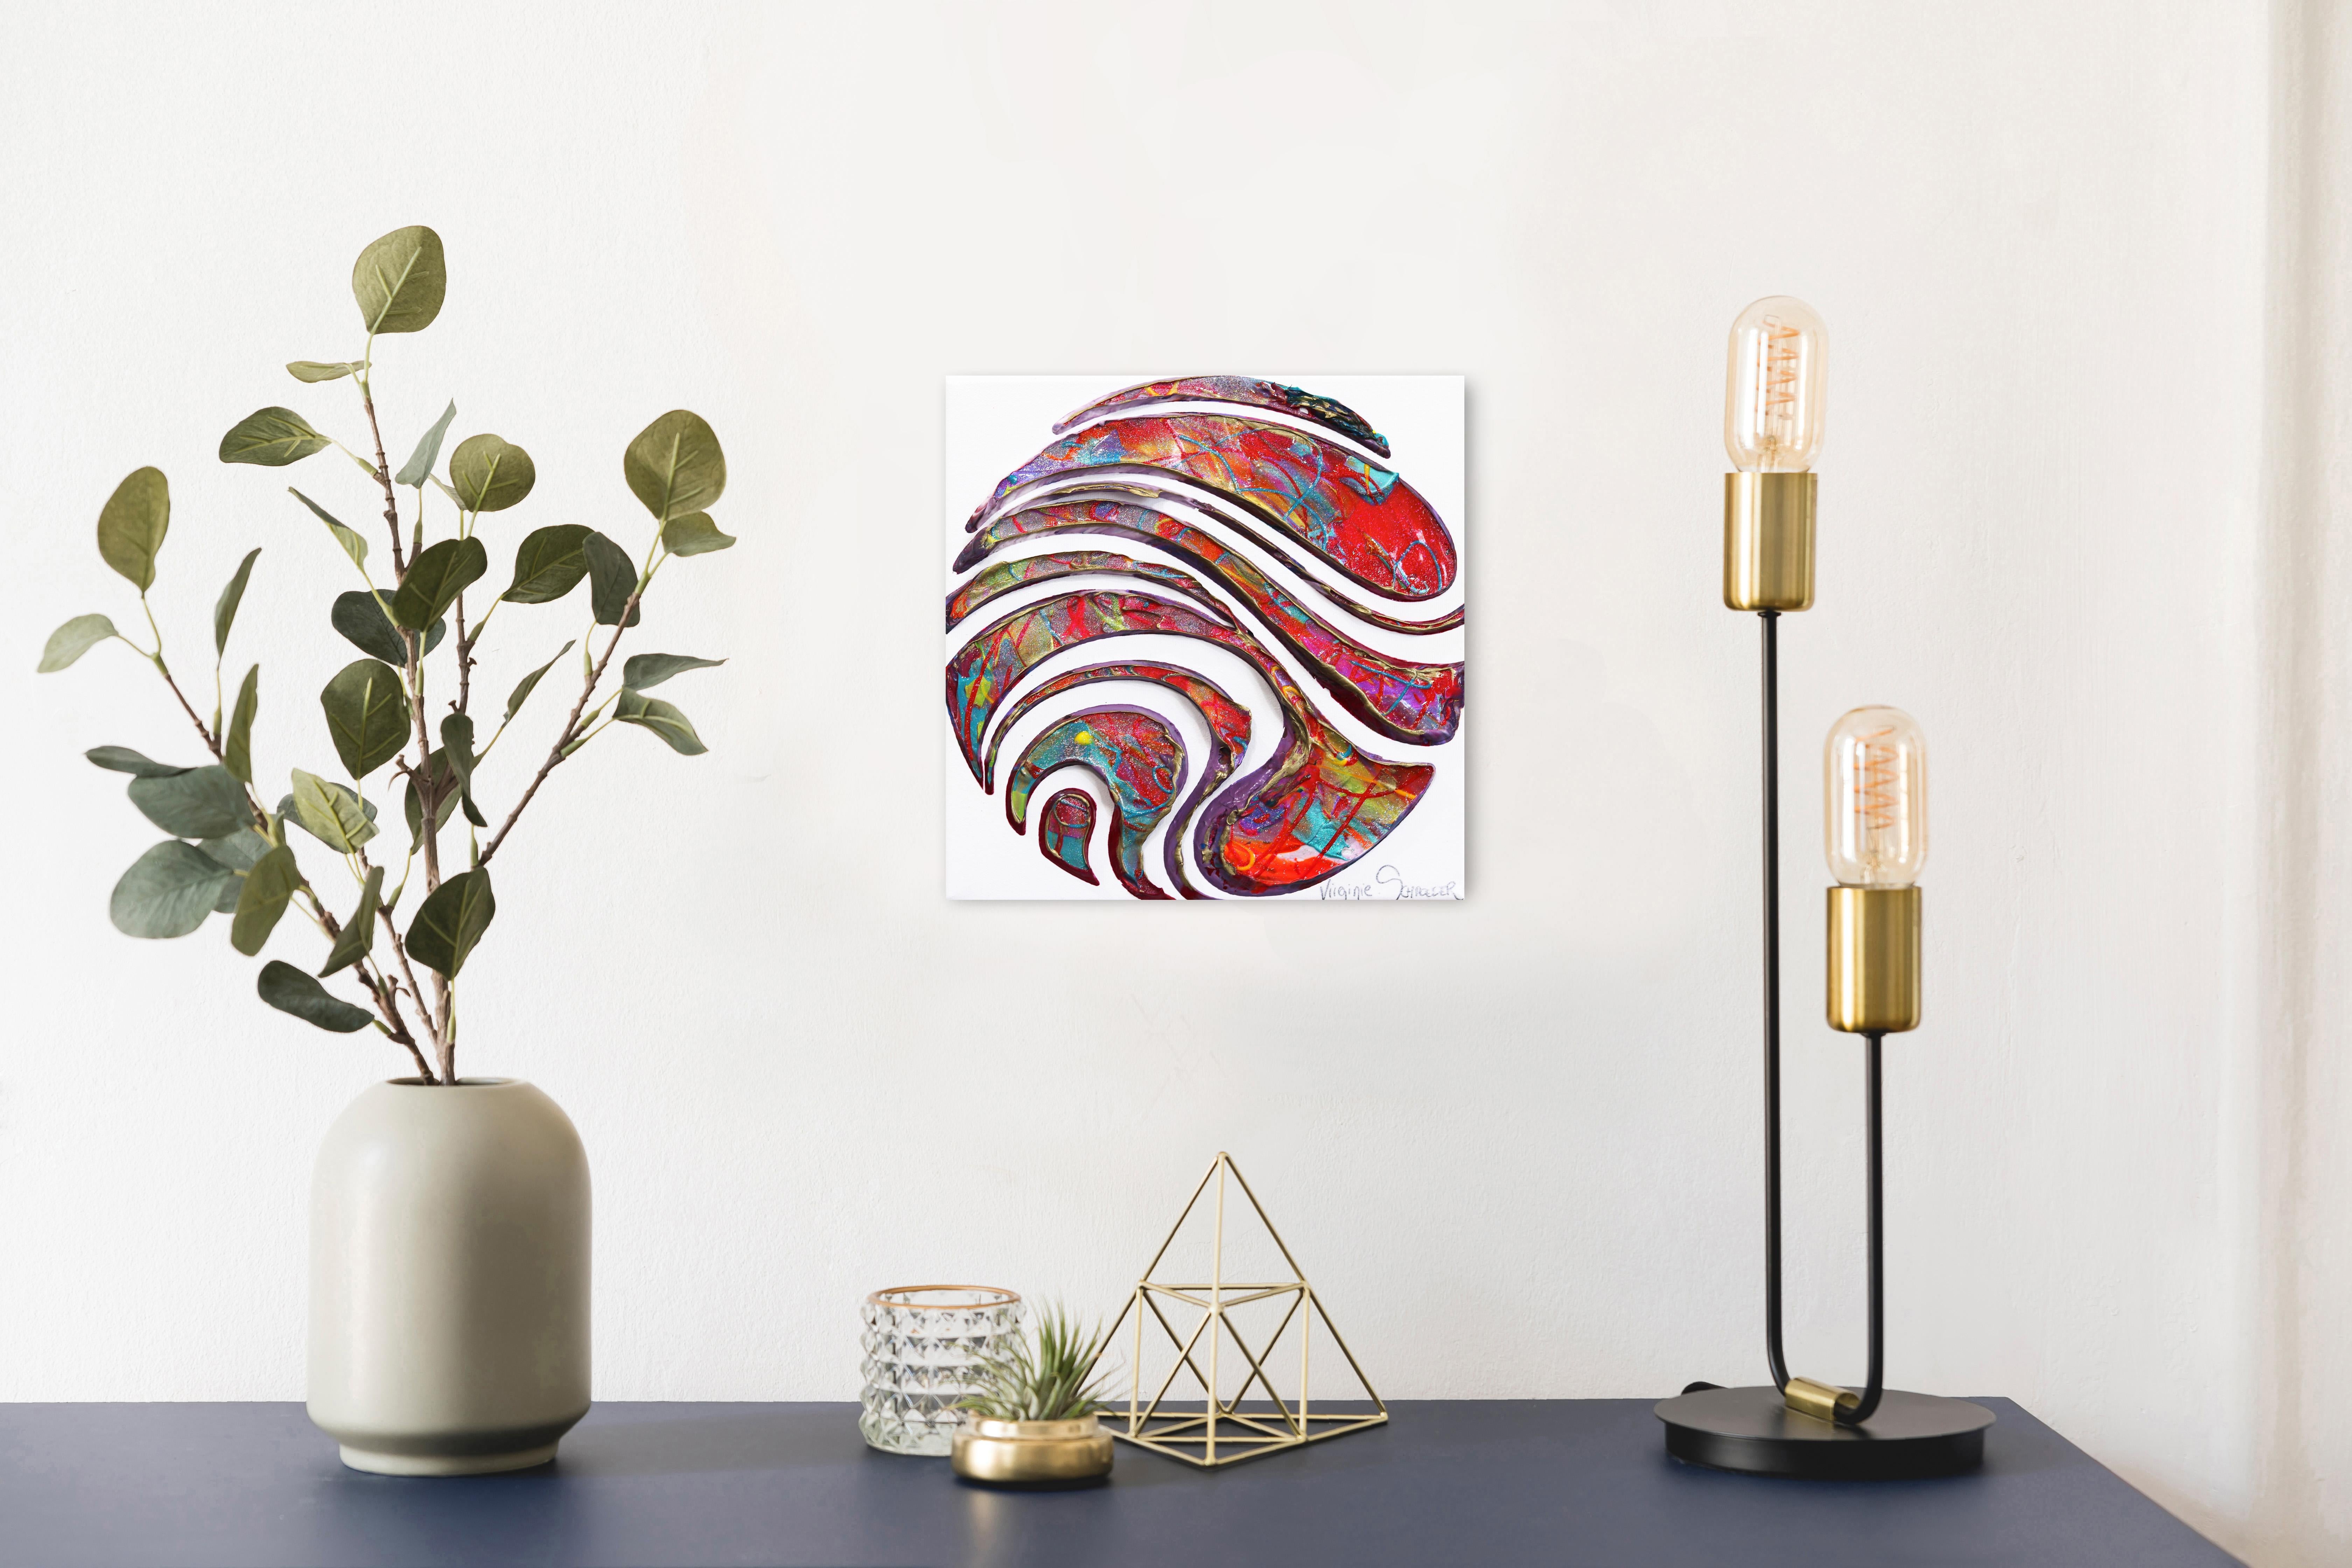 Find Your Dream and Focus - Colorful Abstract 3D Circle Textural Painting - Pop Art Art by Virginie Schroeder